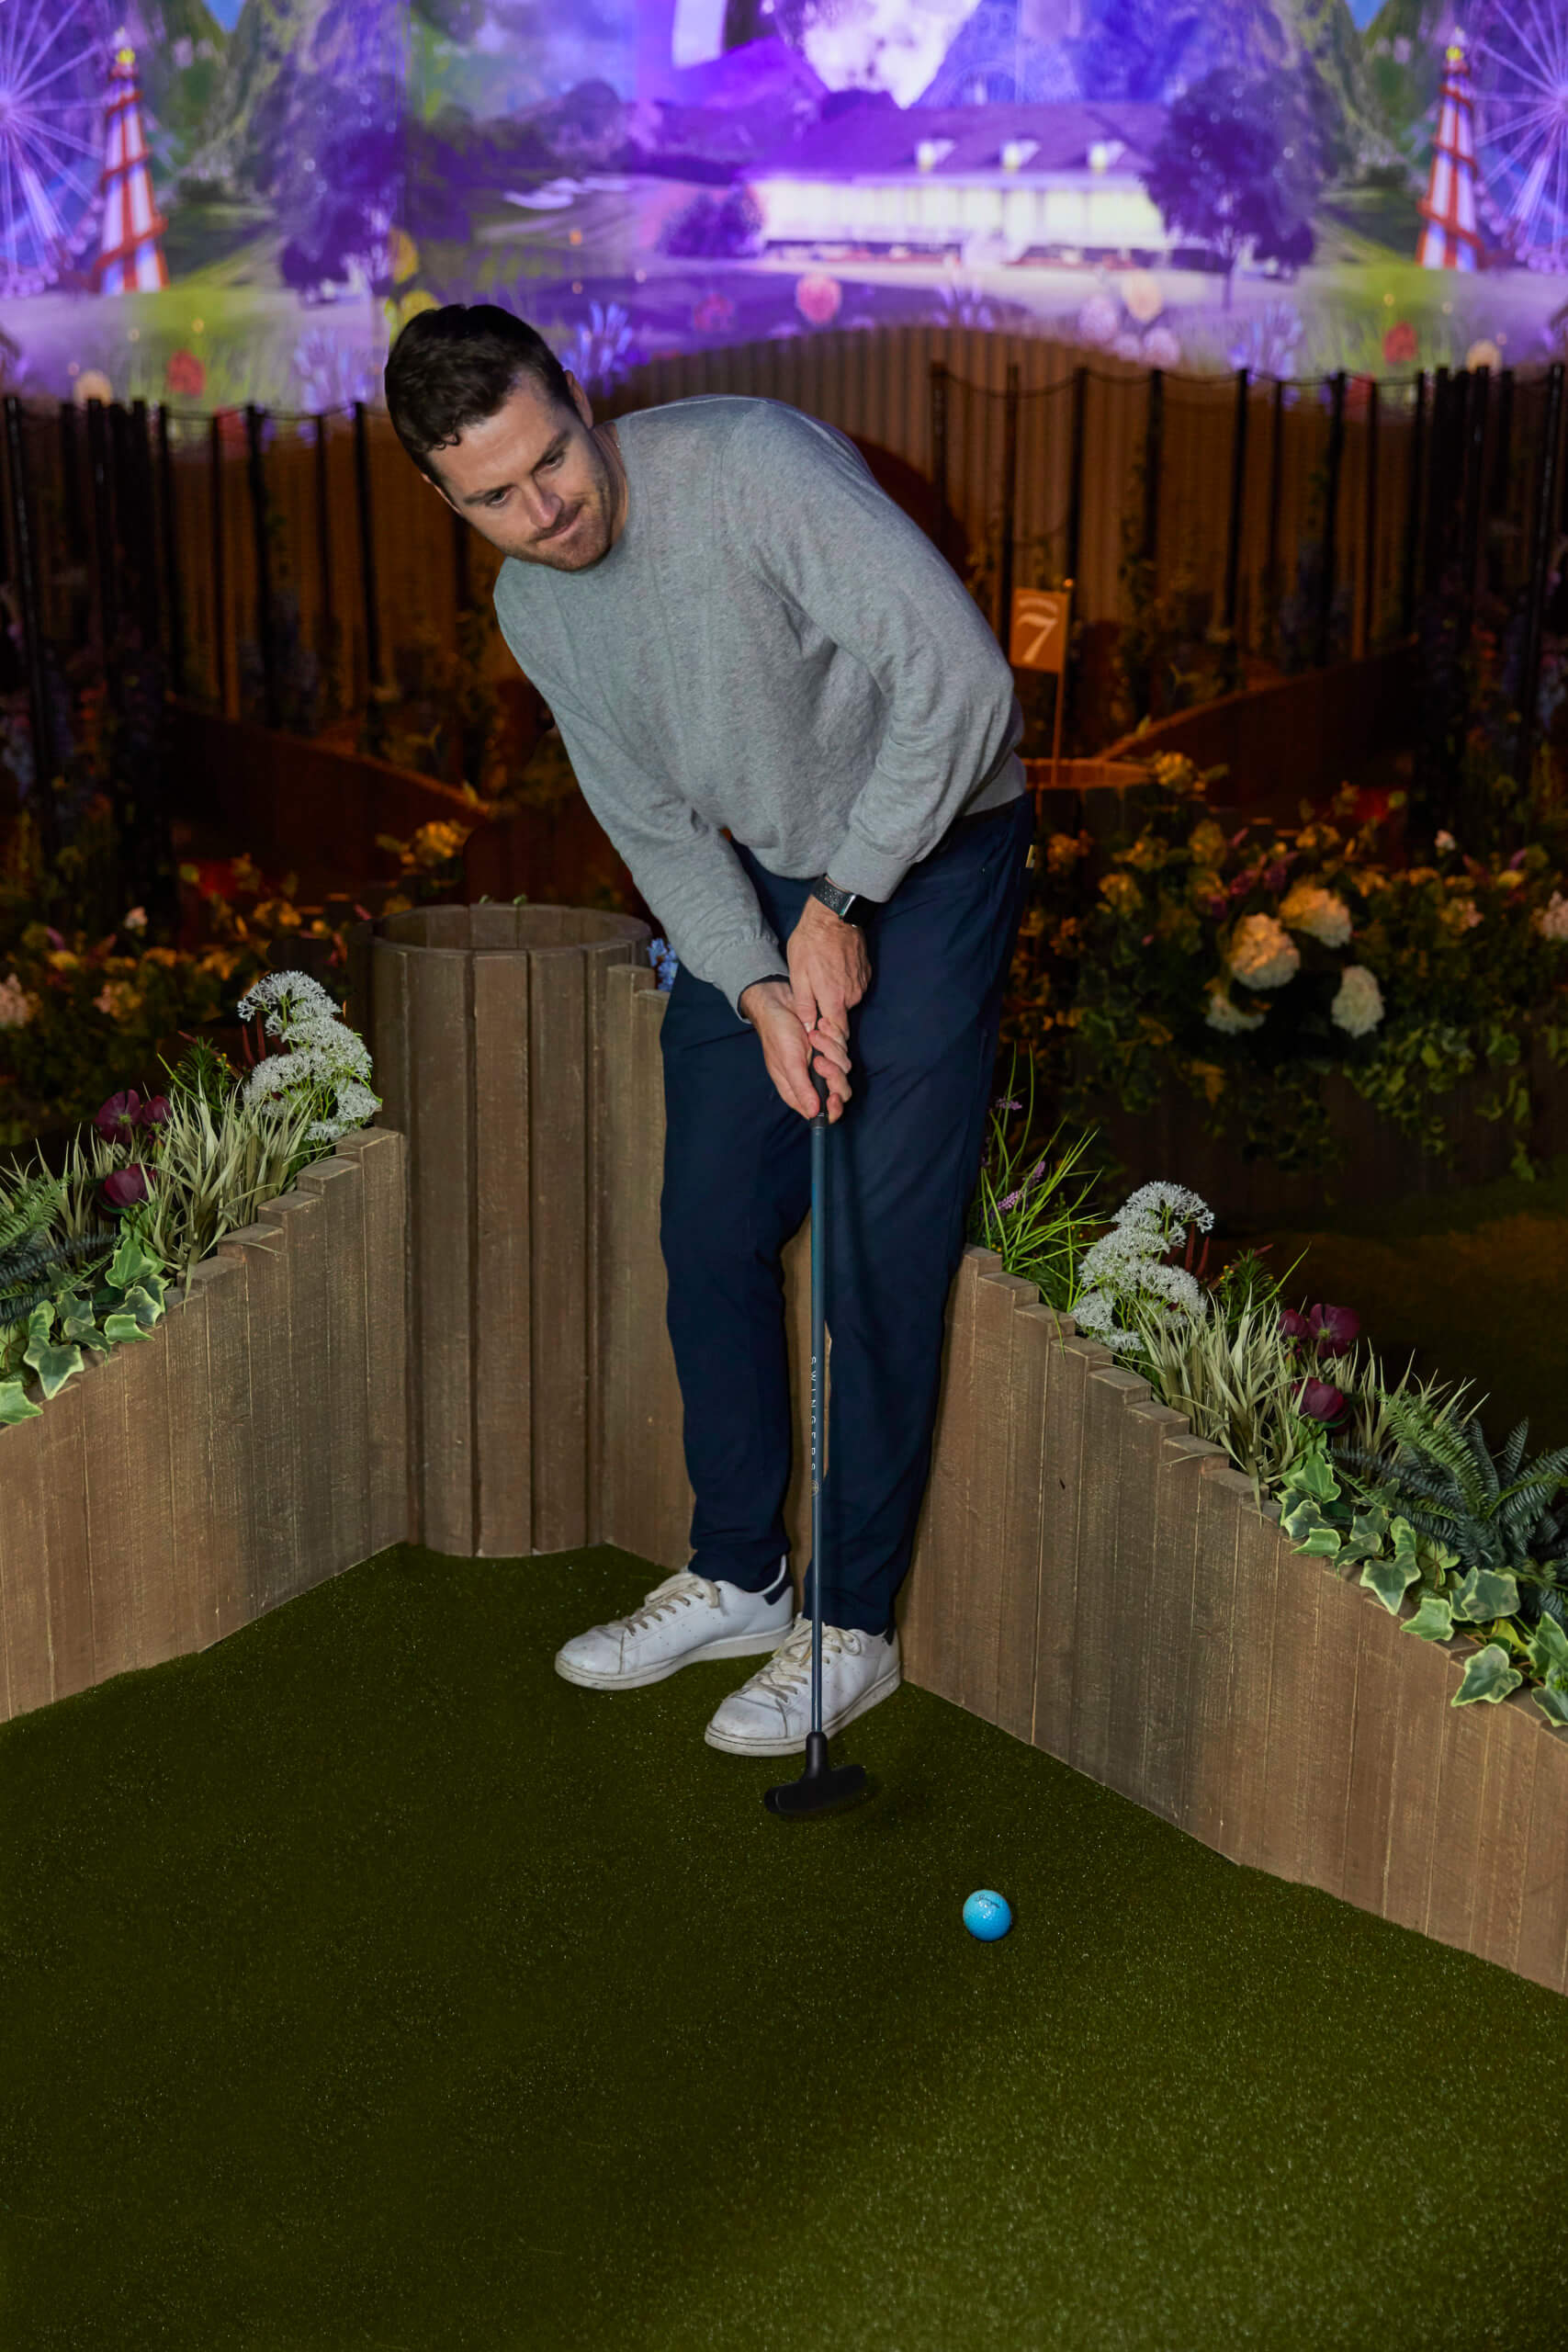 Swingers brings immersive mini golf experience to New York City with ... photo